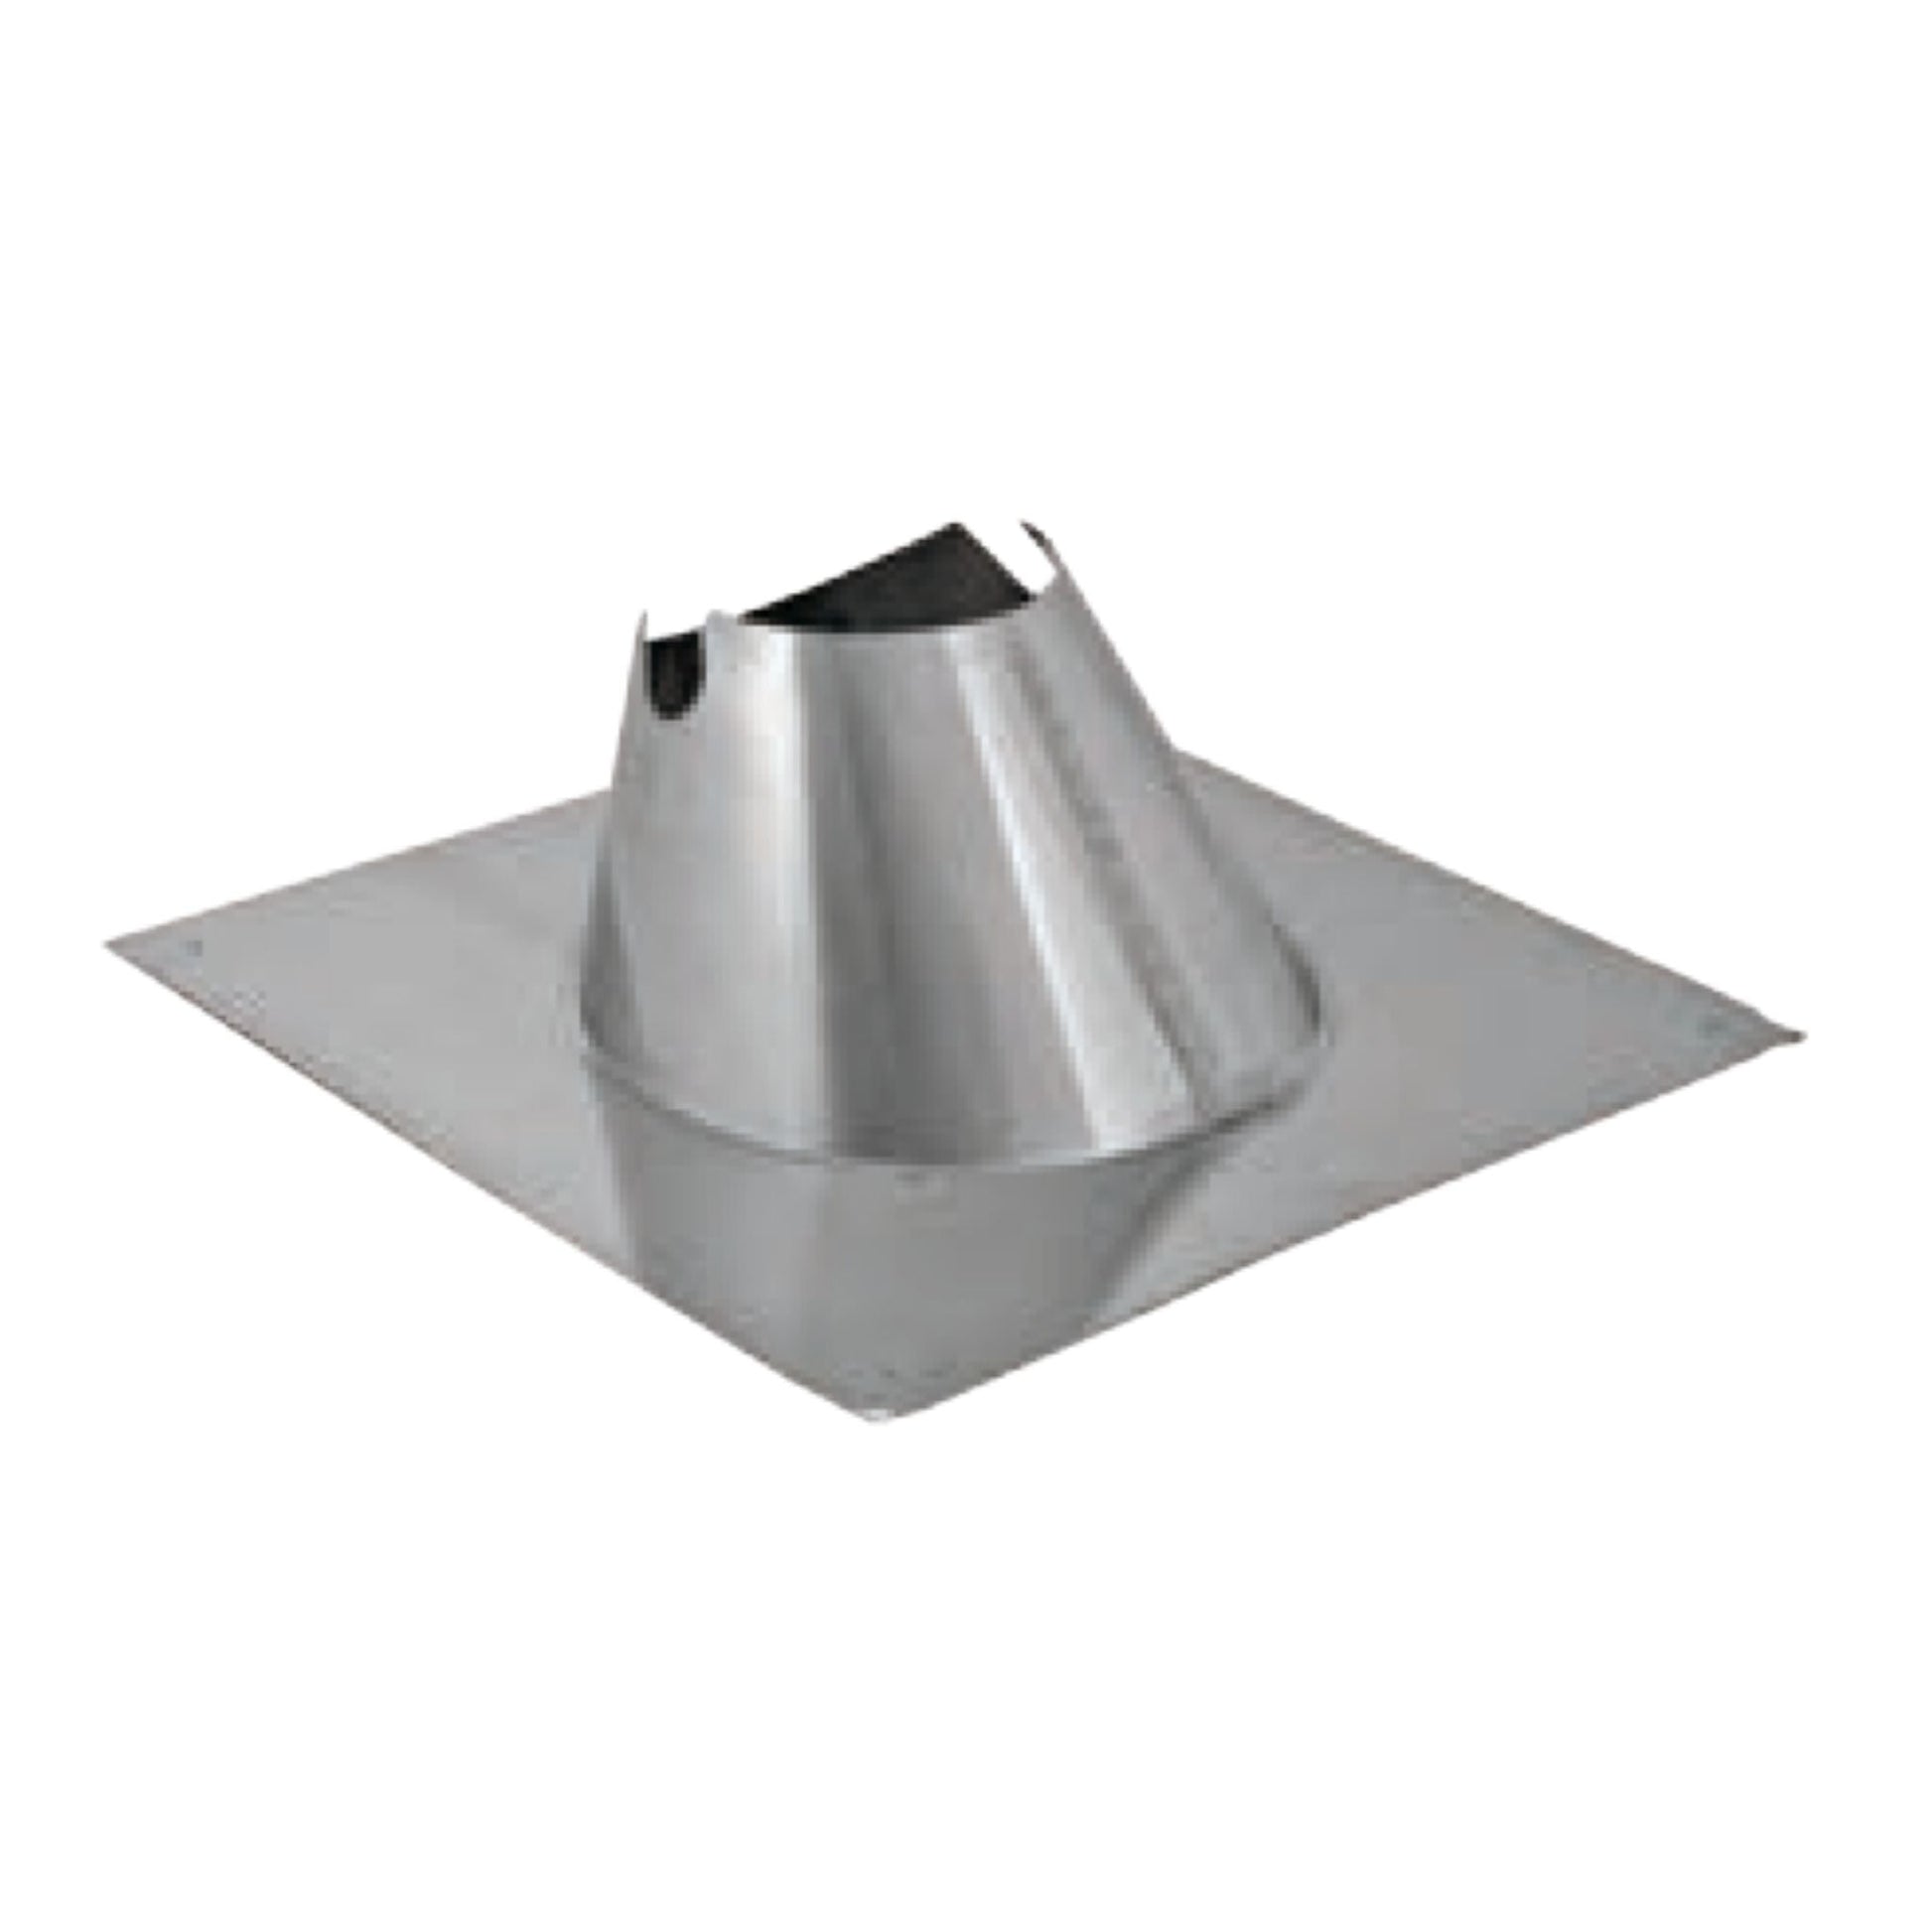 DuraVent FasNSeal 3" 29-4C Stainless Steel Variable Pitch Roof Flashing